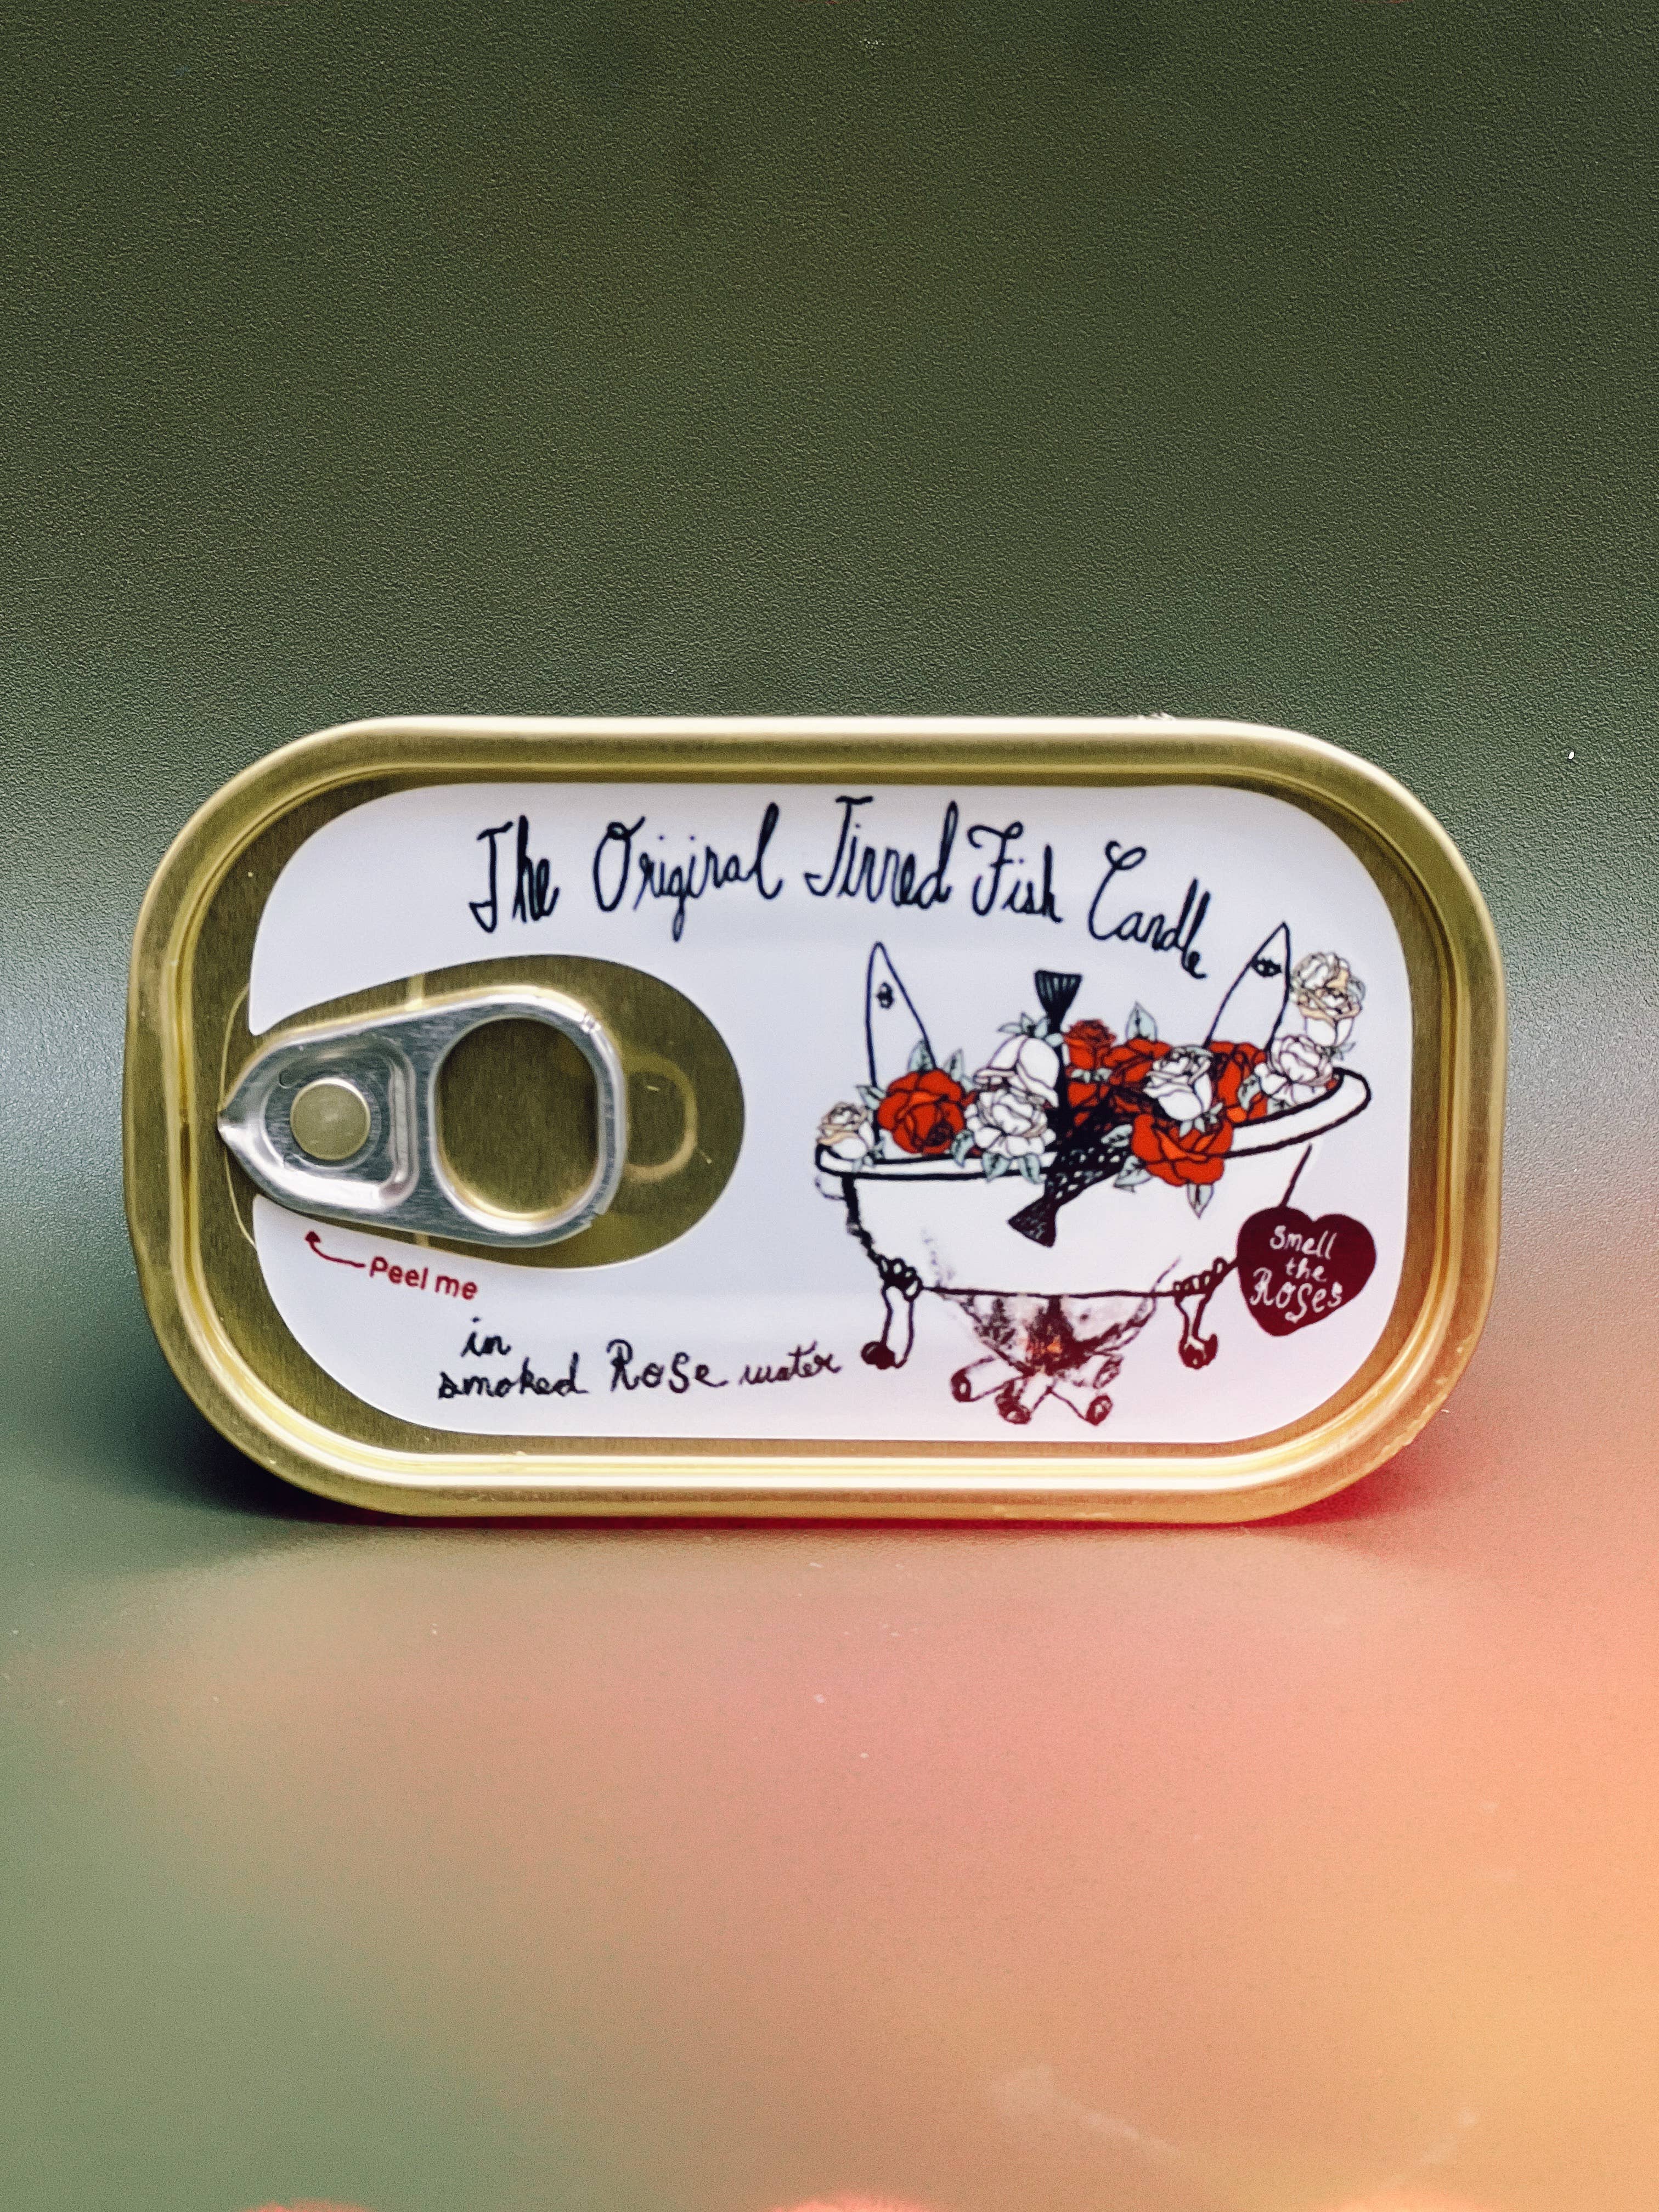 Tinned Fish Candle - Sardines in Smoked Rose Water - Proper